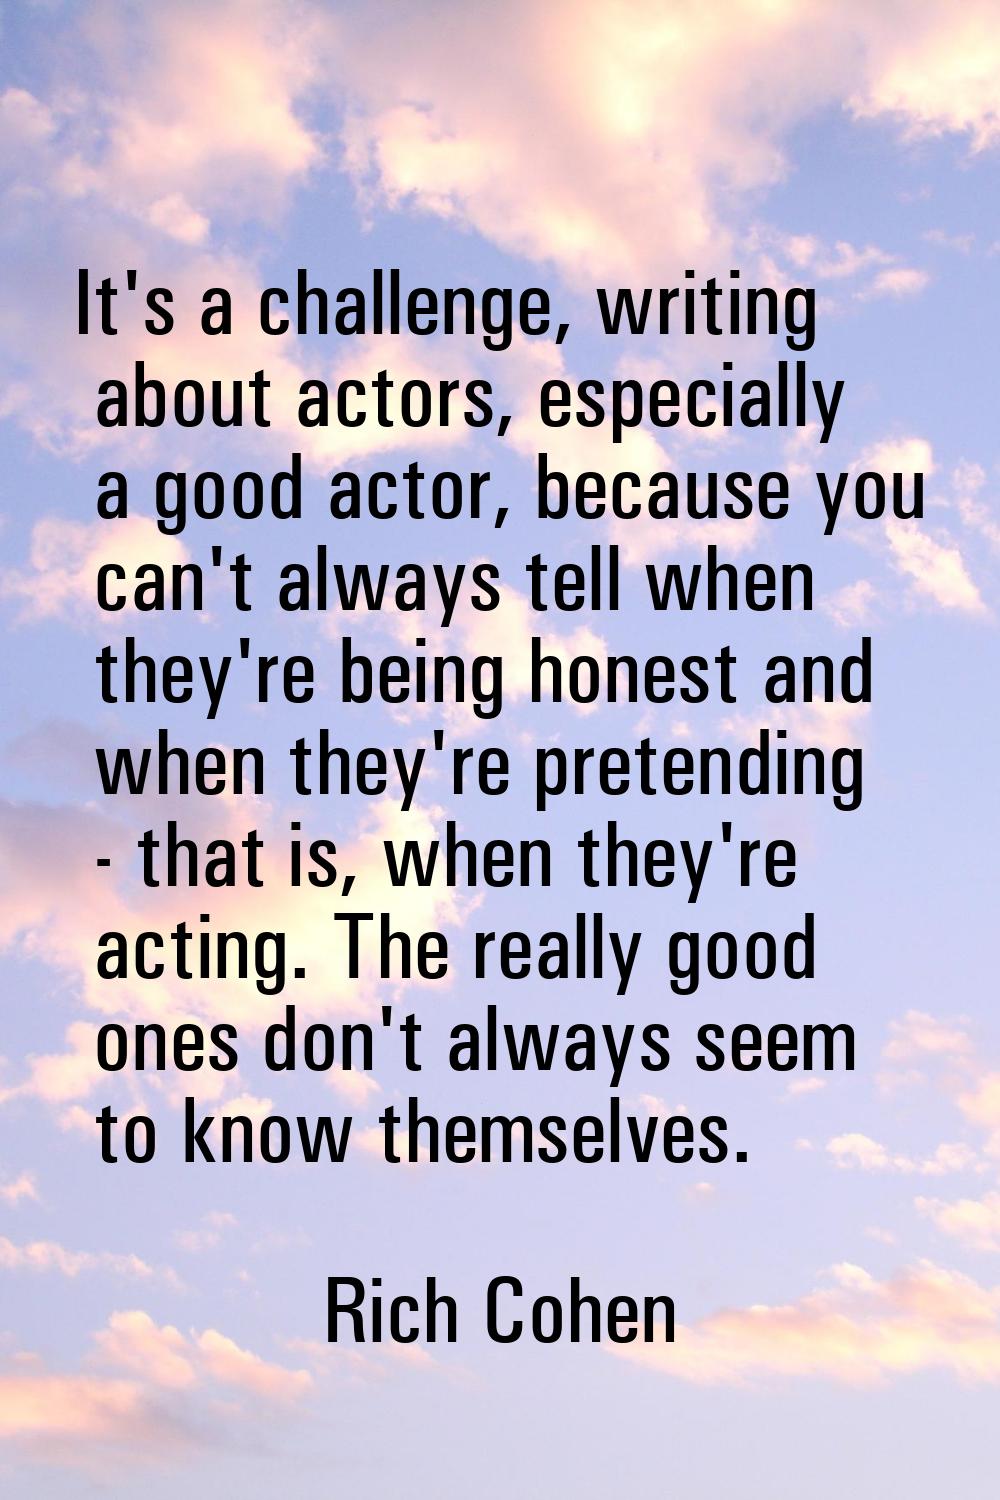 It's a challenge, writing about actors, especially a good actor, because you can't always tell when